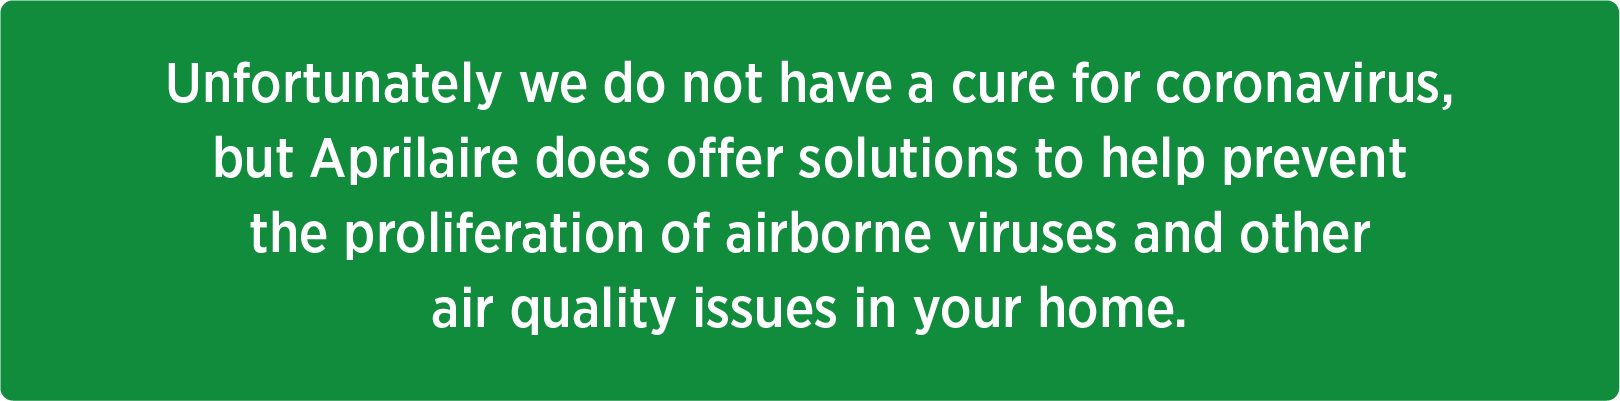 Unfortunately we do not have a cure for coronavirus, but Aprilaire does offer solutions to help prevent the proliferation of airborne viruses and other air quality issues in your home.